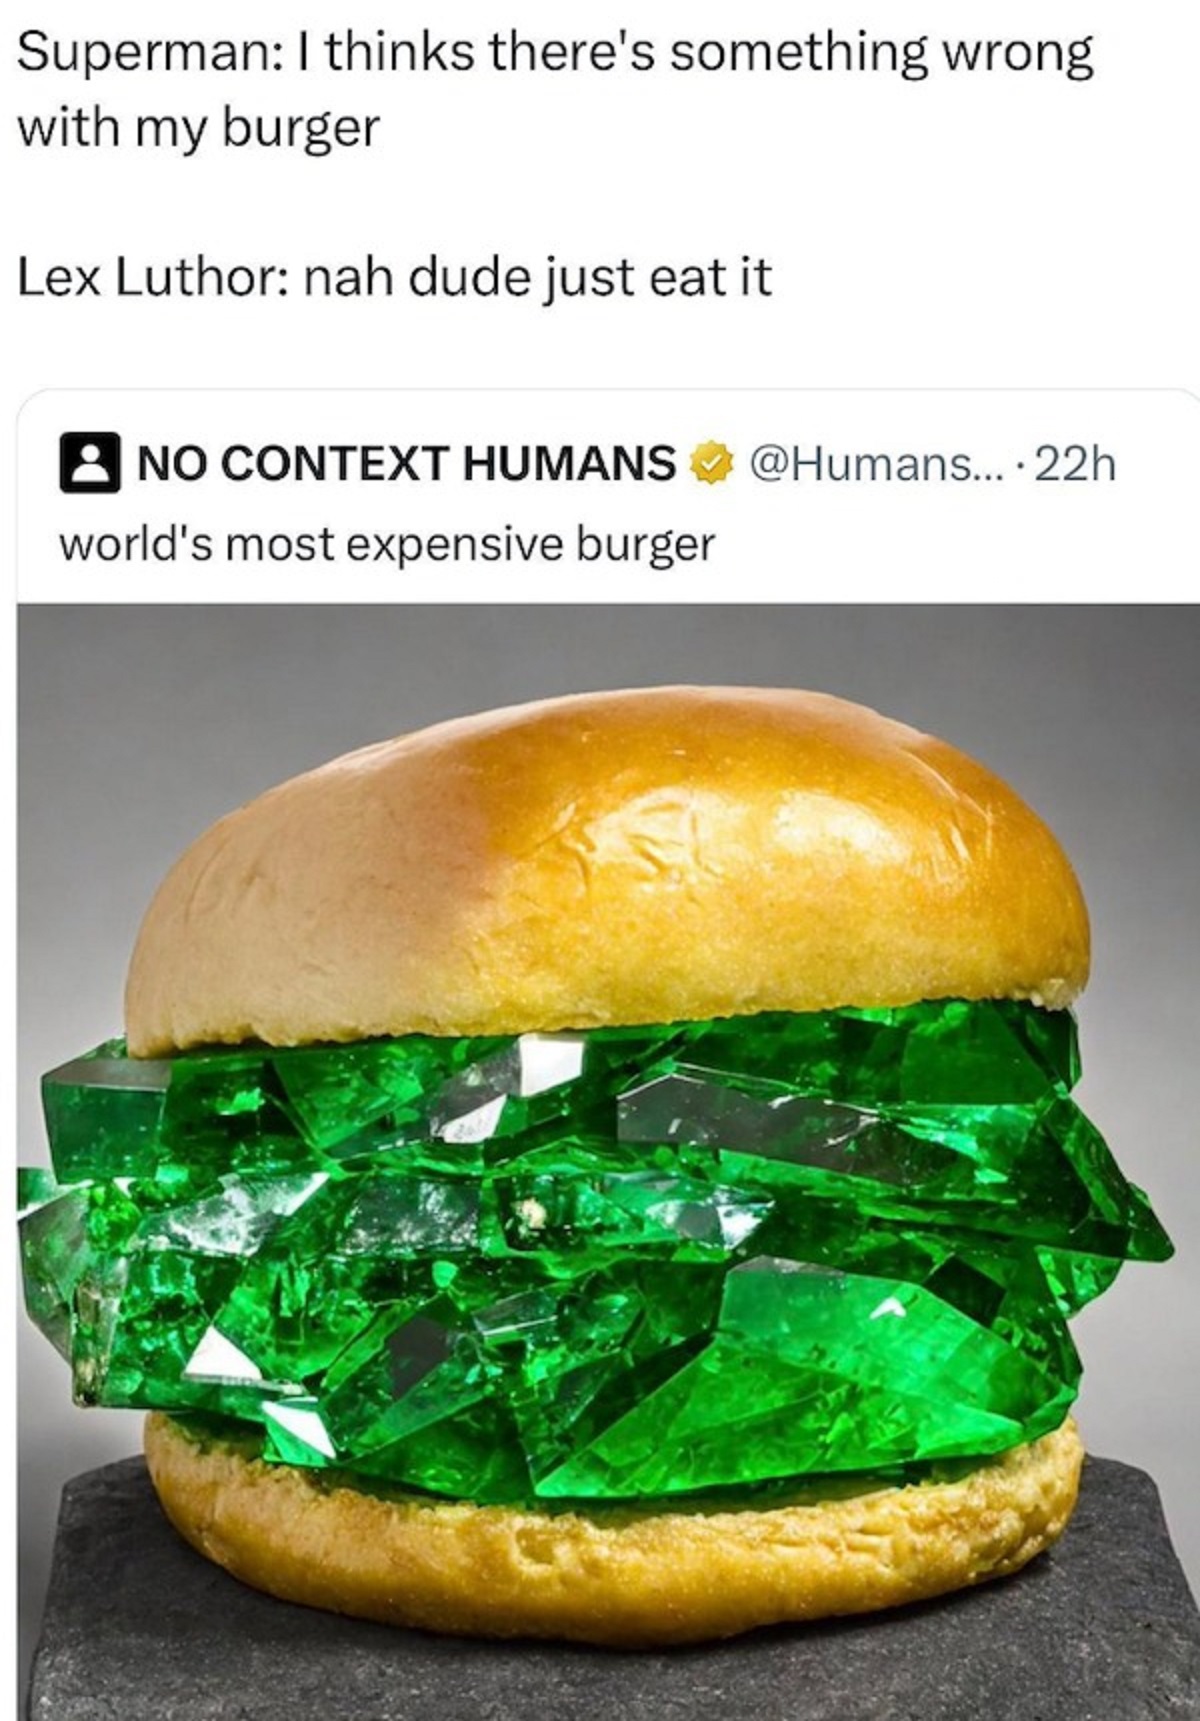 cheeseburger - Superman I thinks there's something wrong with my burger Lex Luthor nah dude just eat it 2 No Context Humans .... 22h world's most expensive burger